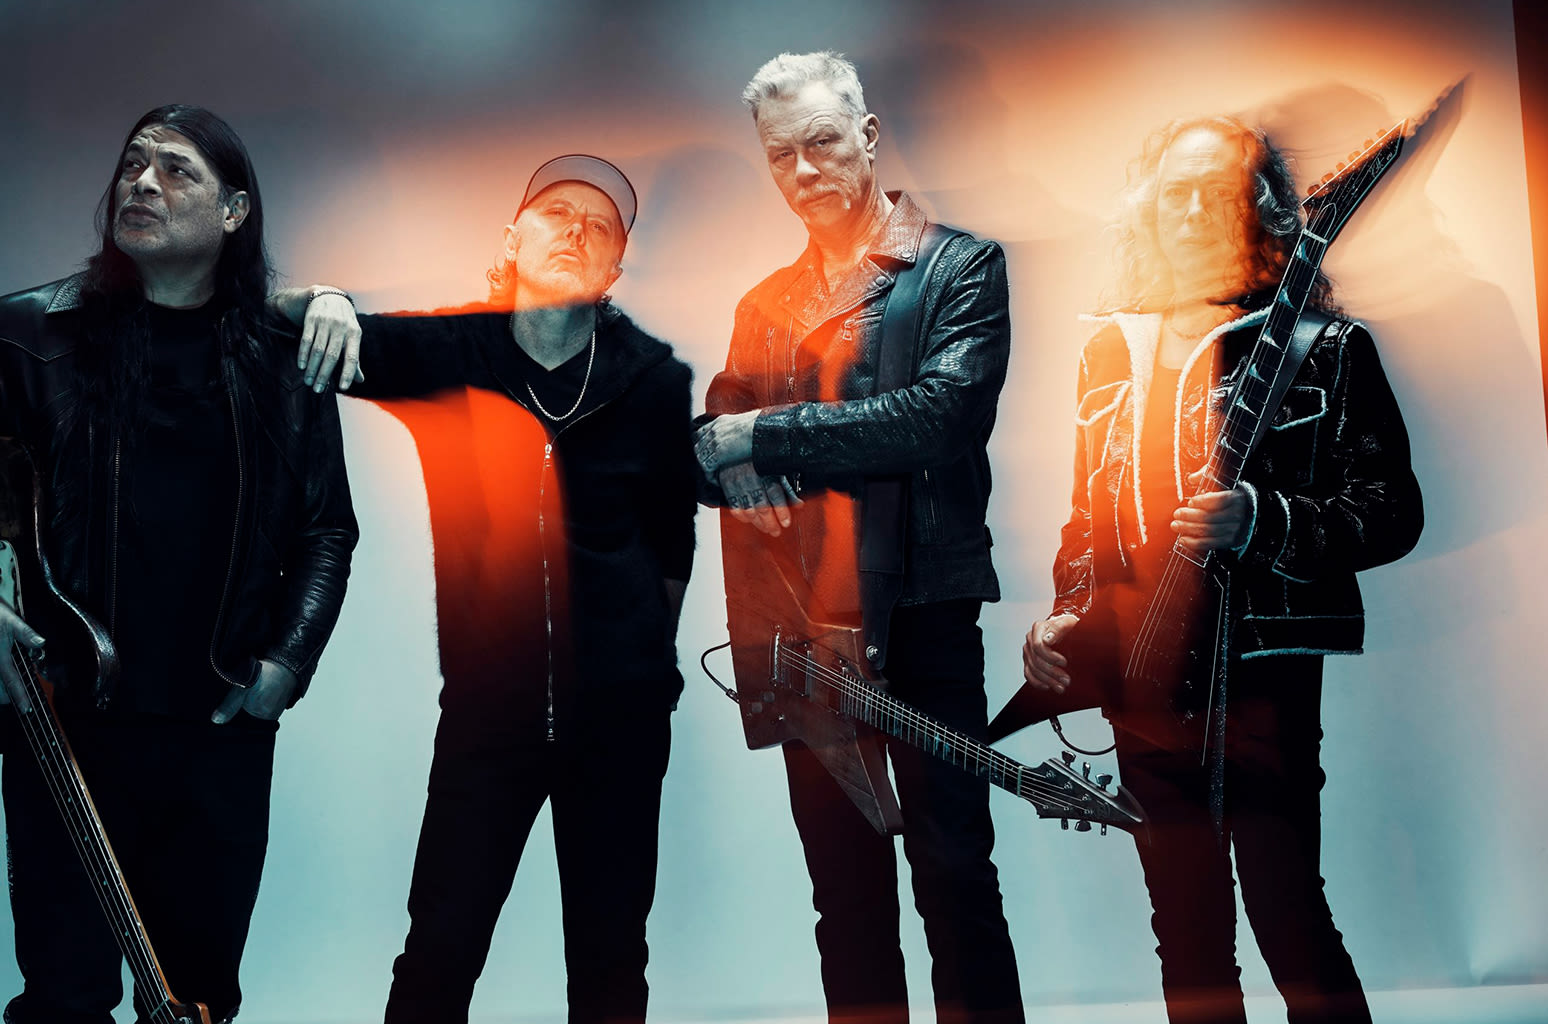 Metallica Achieves This Feat for the First Time on Mainstream Rock Airplay Chart